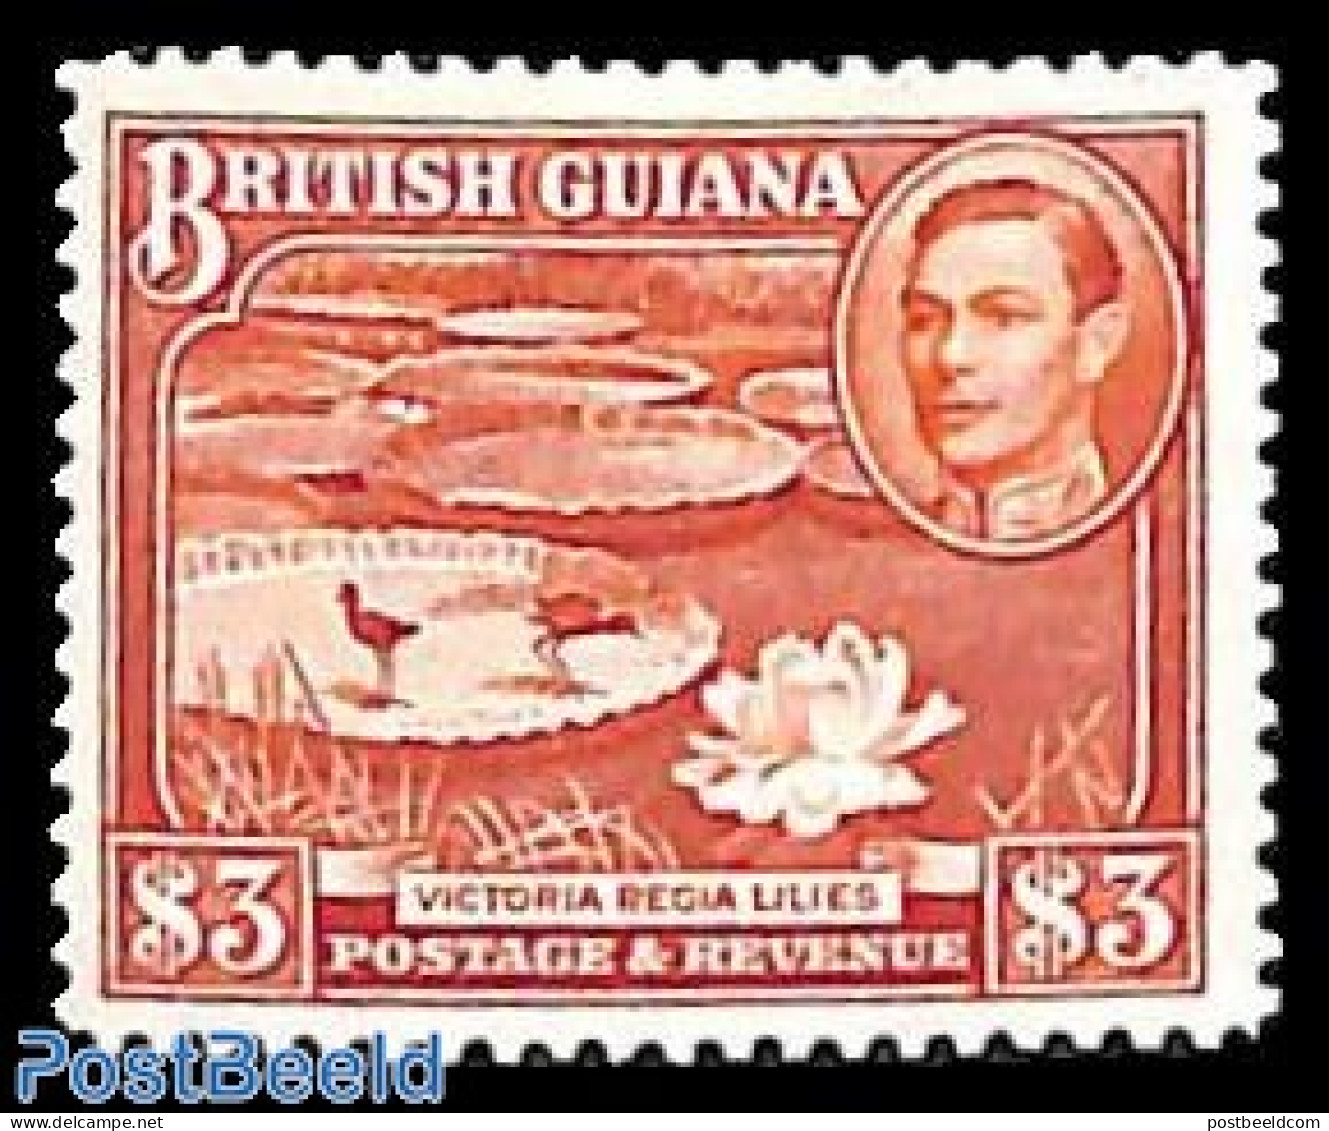 Guyana 1946 $3, Stamp Out Of Set, Mint NH, Nature - Birds - Flowers & Plants - Guyane (1966-...)